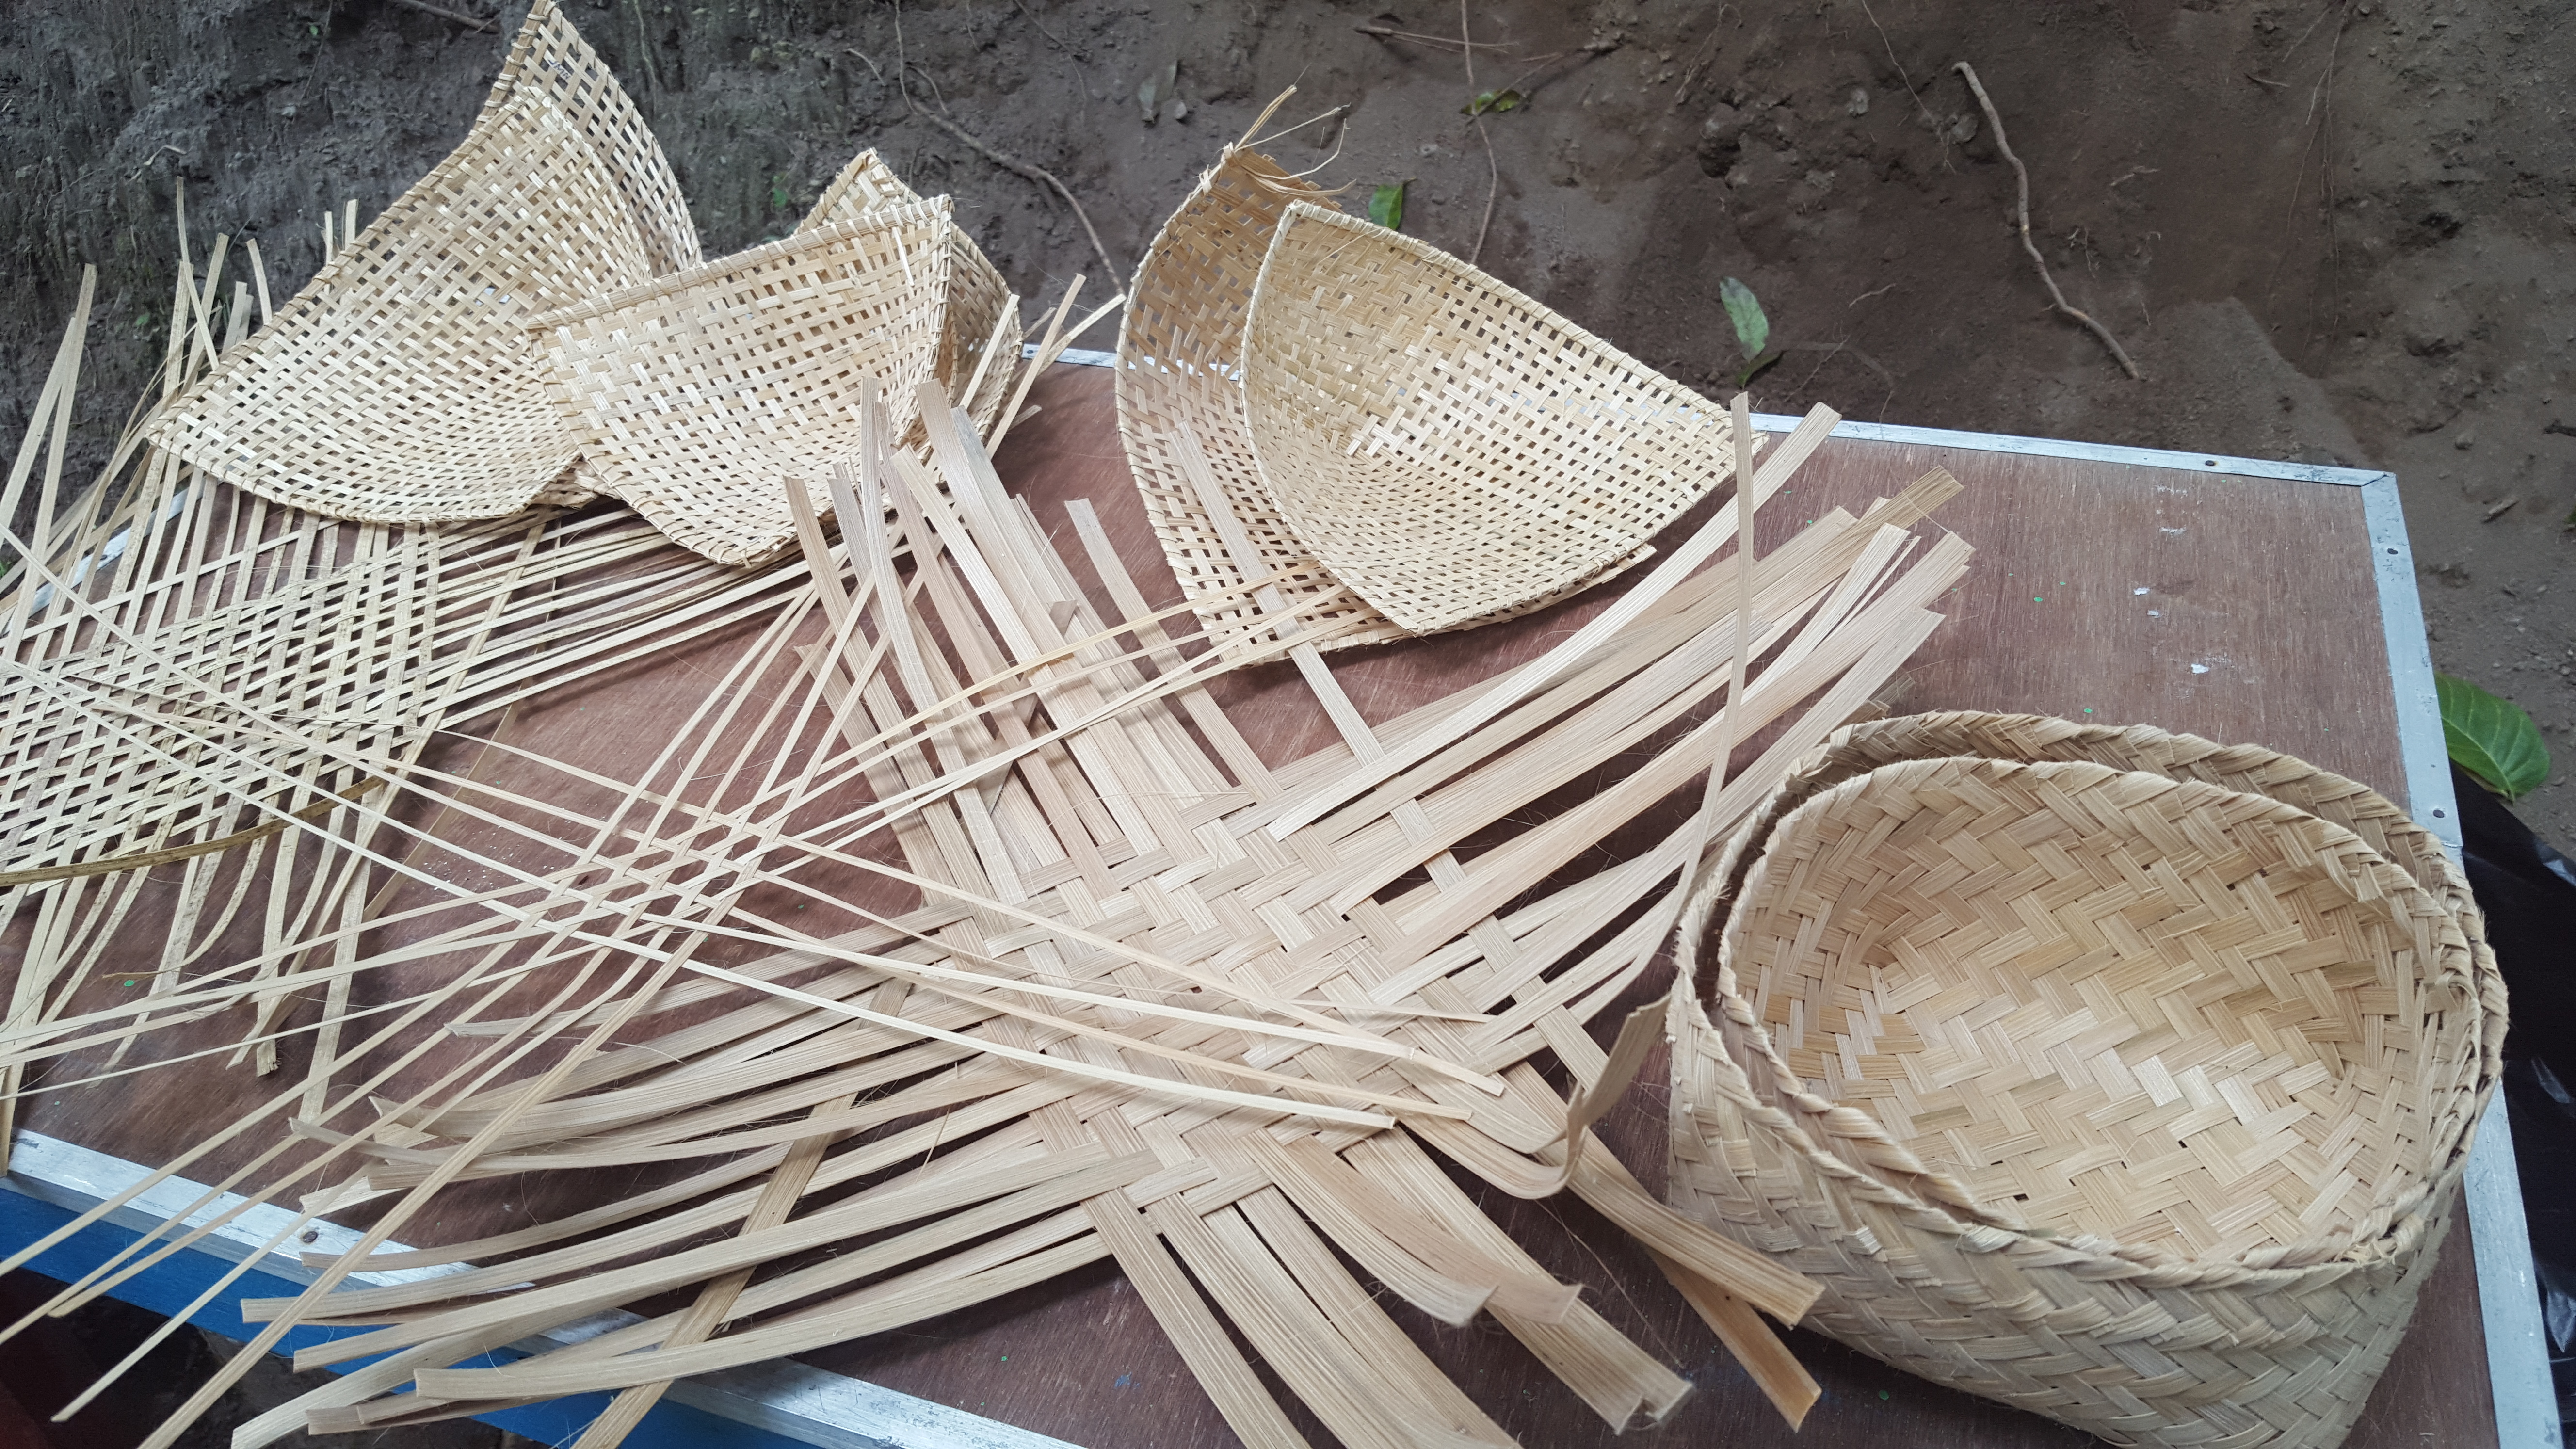  Bamboo handicraft  orders have dropped reducing womens 